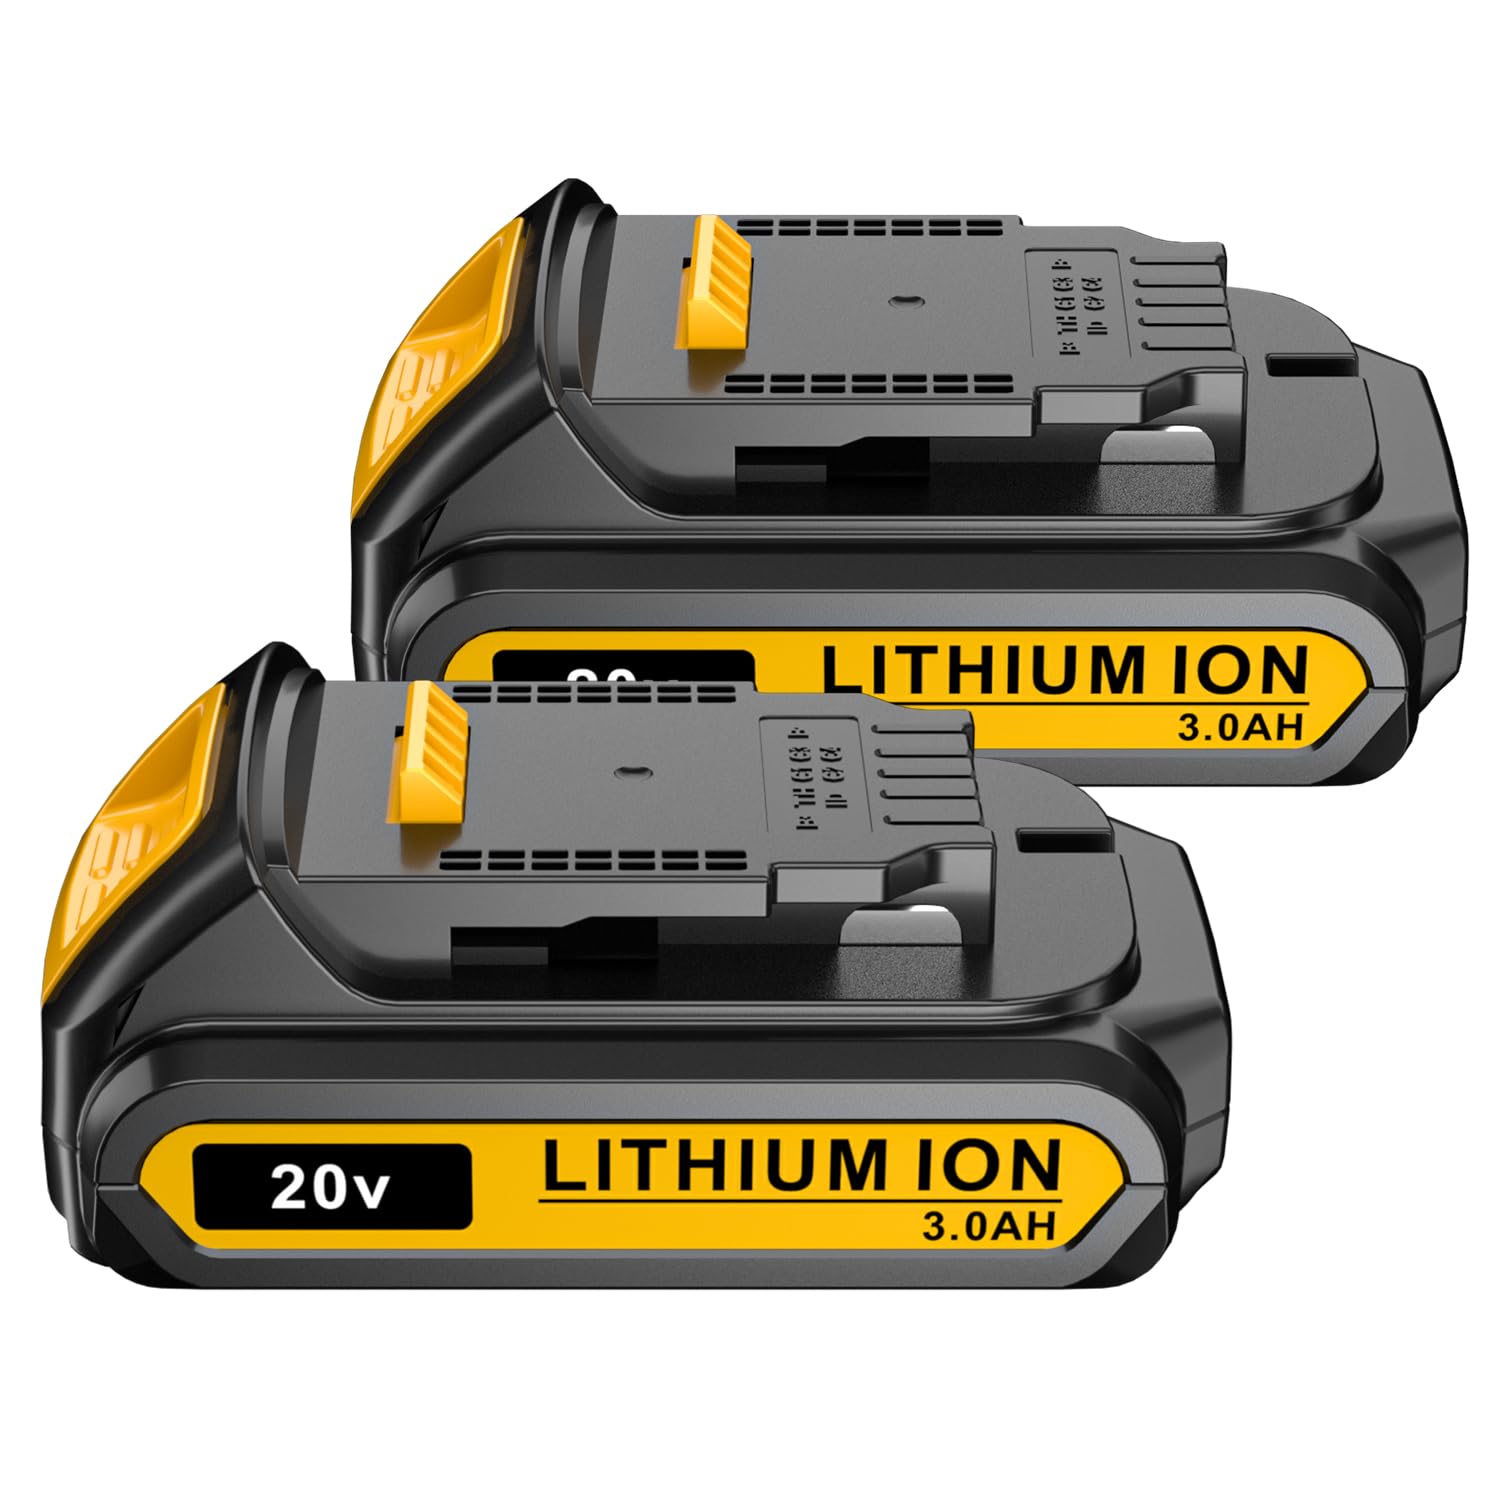 2Packs 20V 3.0Ah Replacement Battery for Dewalt 20V Compatible with Dewalt DCB200 DCD DCF DCG Series Cordless Power Tools